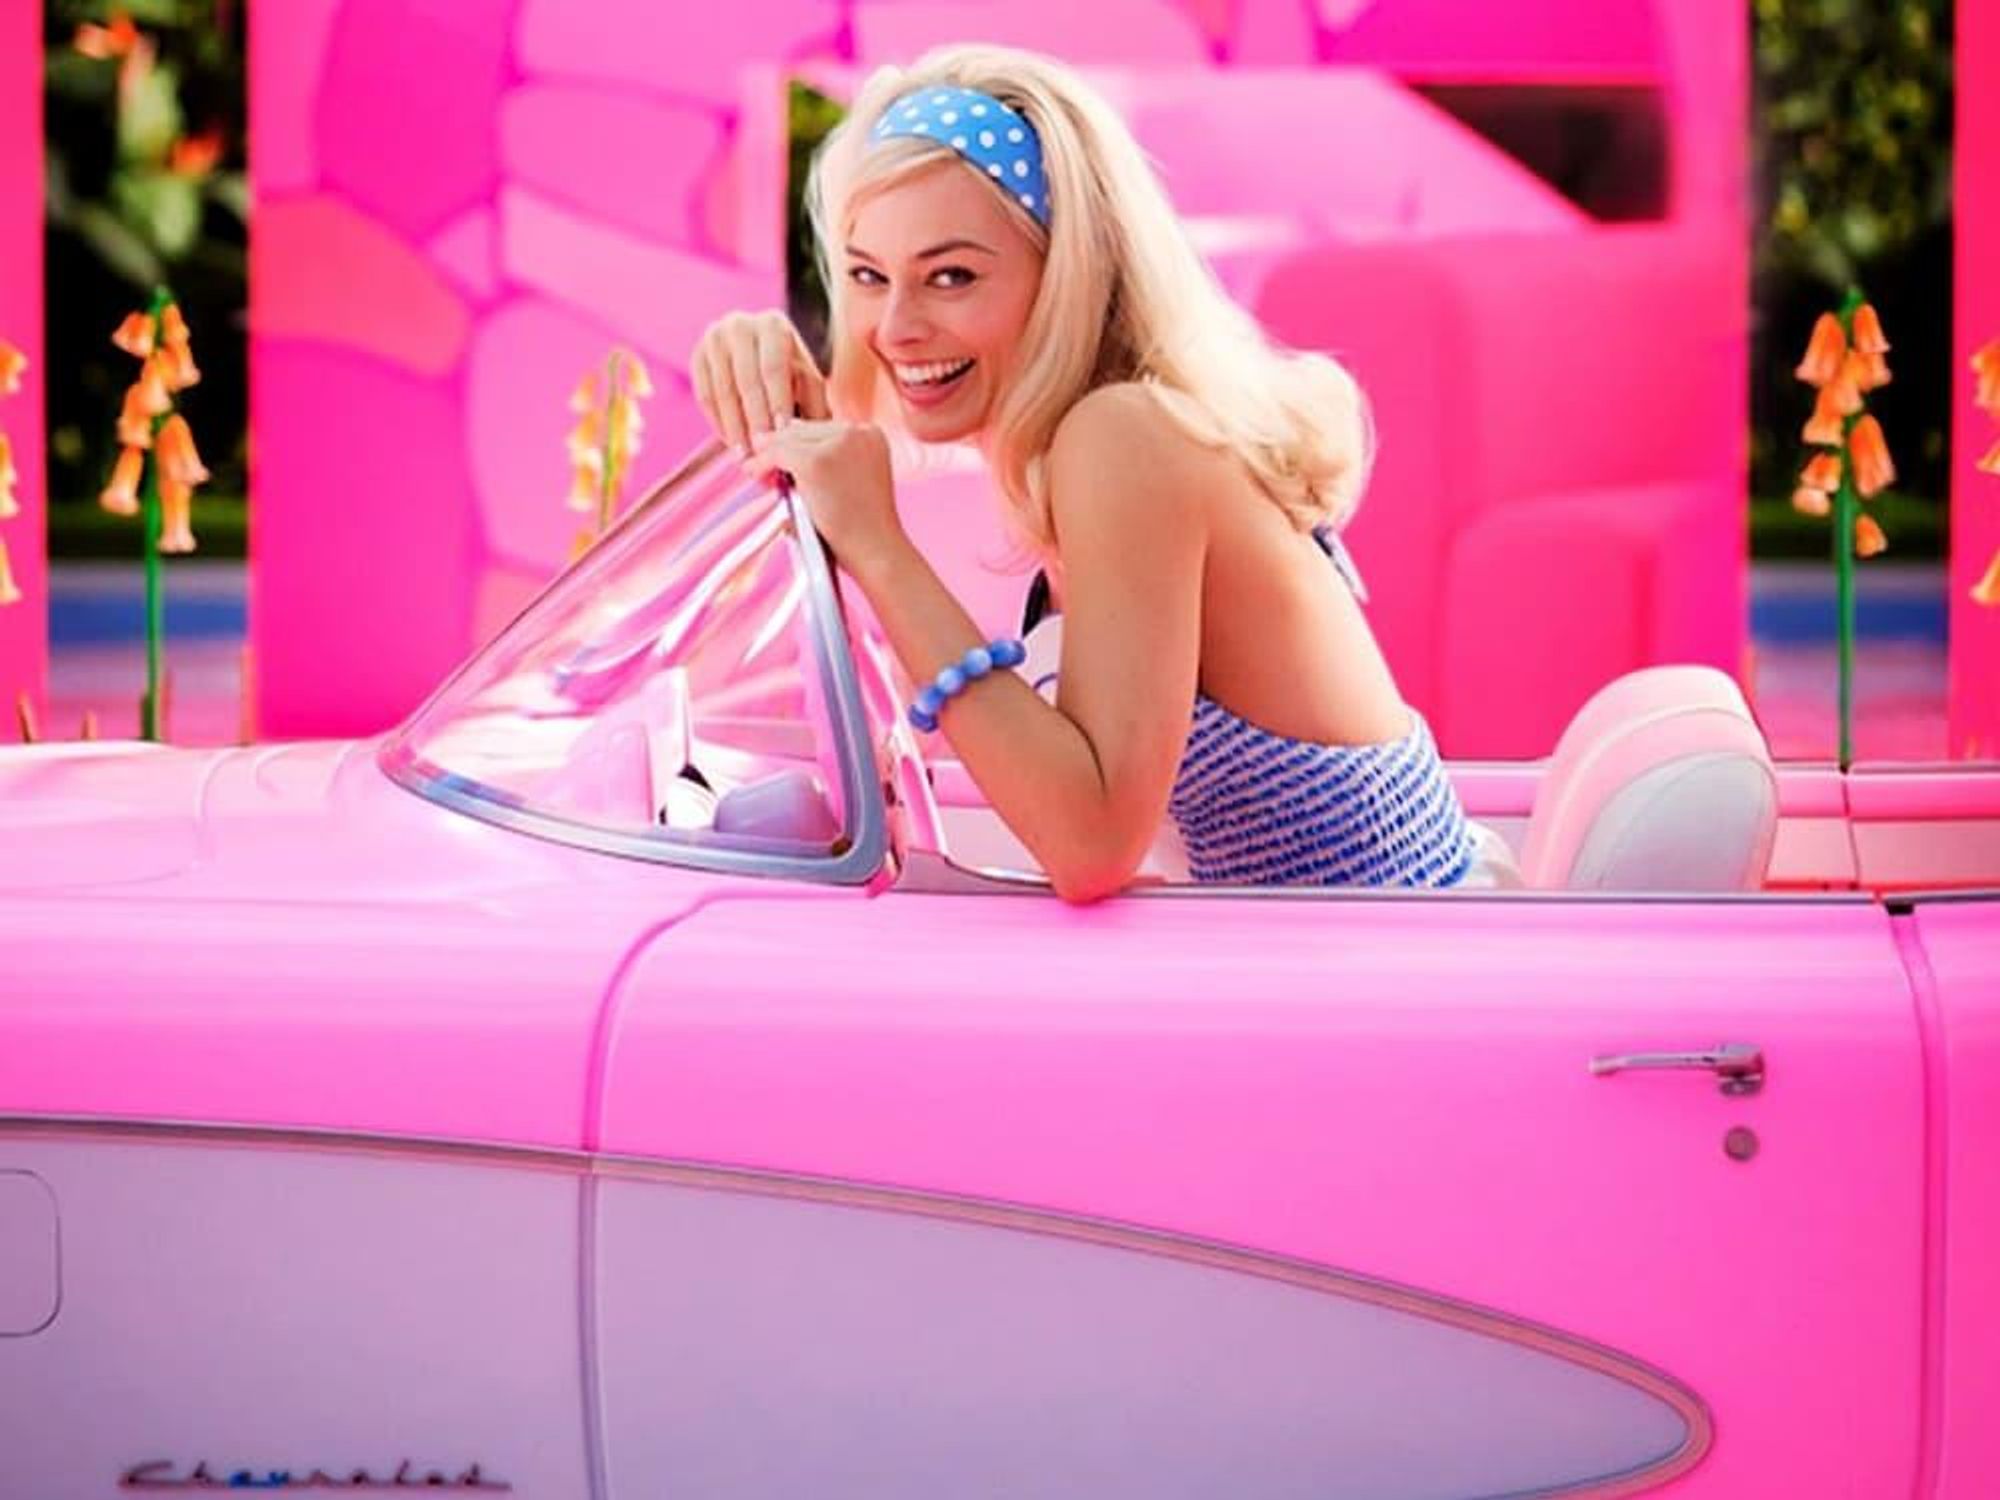 Over-the-top Barbie party will turn Southlake theater into glittery pink  paradise - CultureMap Fort Worth